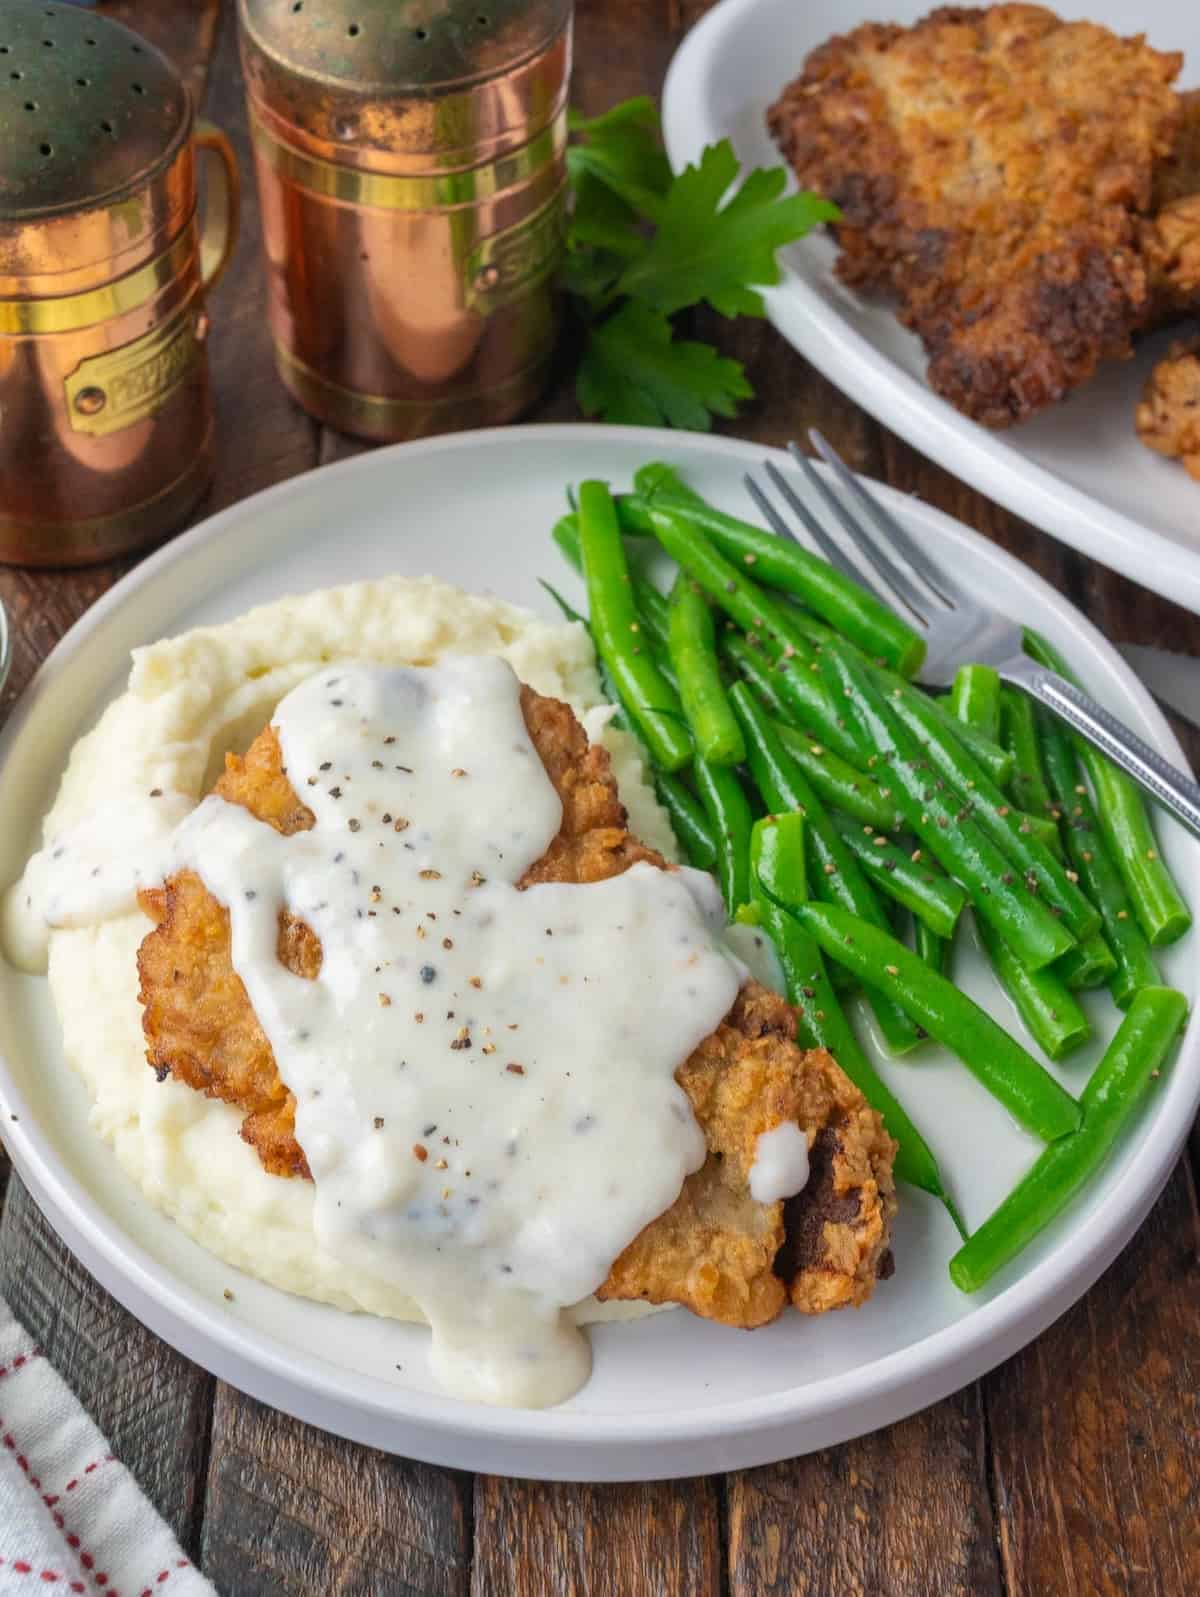 Chicken fried steak with gravy over mashed potatoes with a side of green beans.